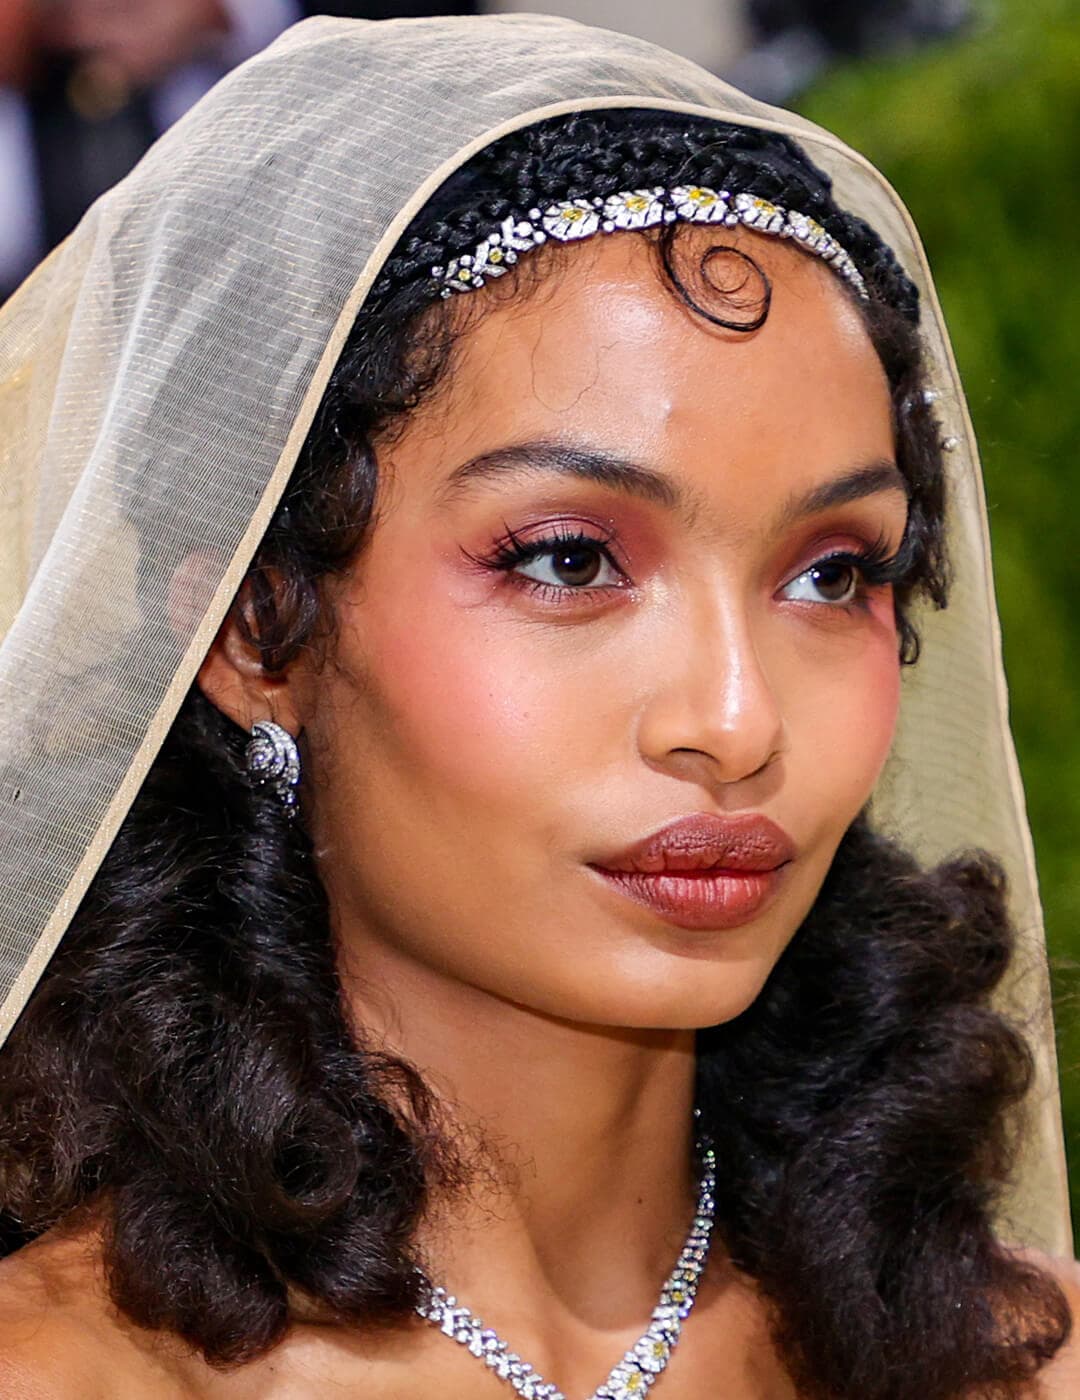 Yara Shahidi rocking a Gatsby-inspired makeup look, silver jewelry, and cream veil on the red carpet